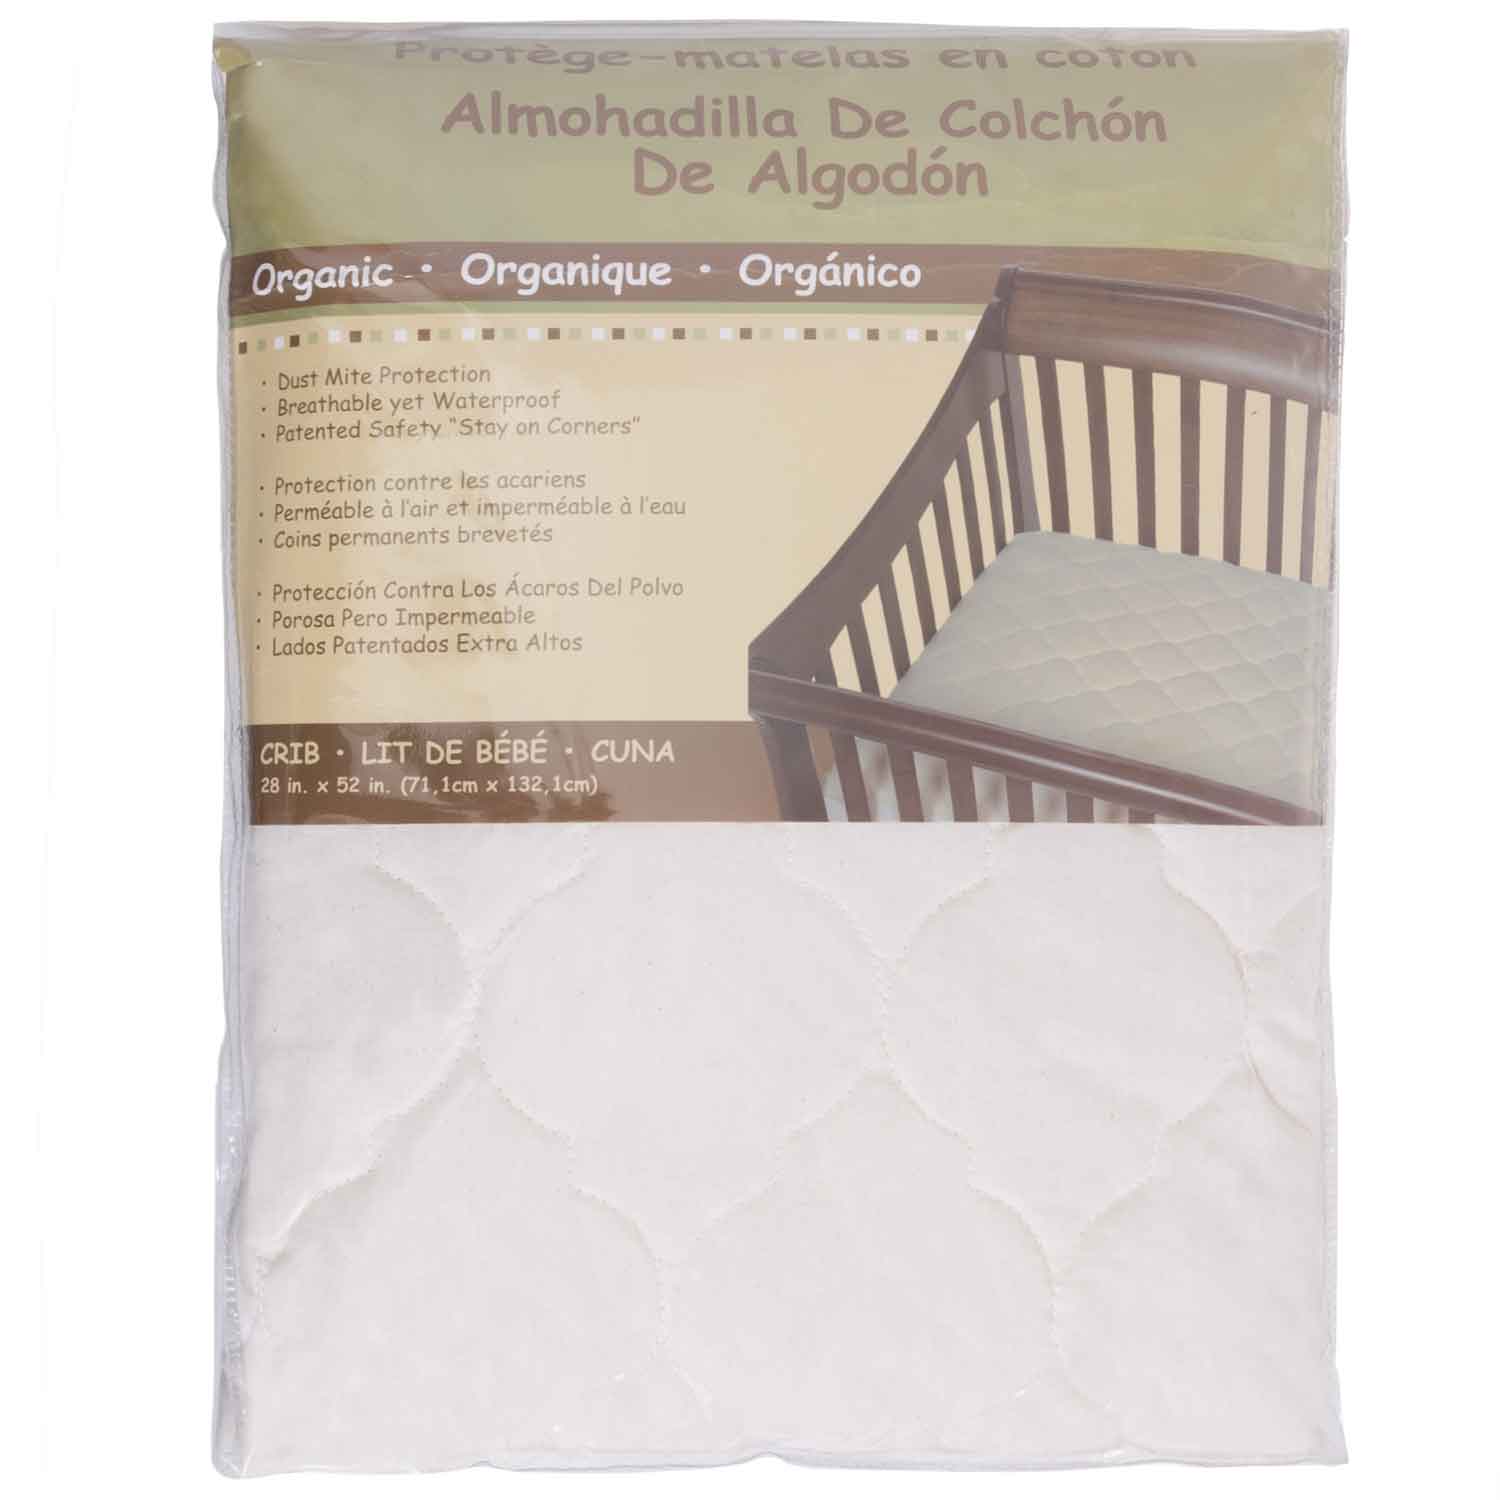 Organic baby crib fitted mattress protector, 28"x52"